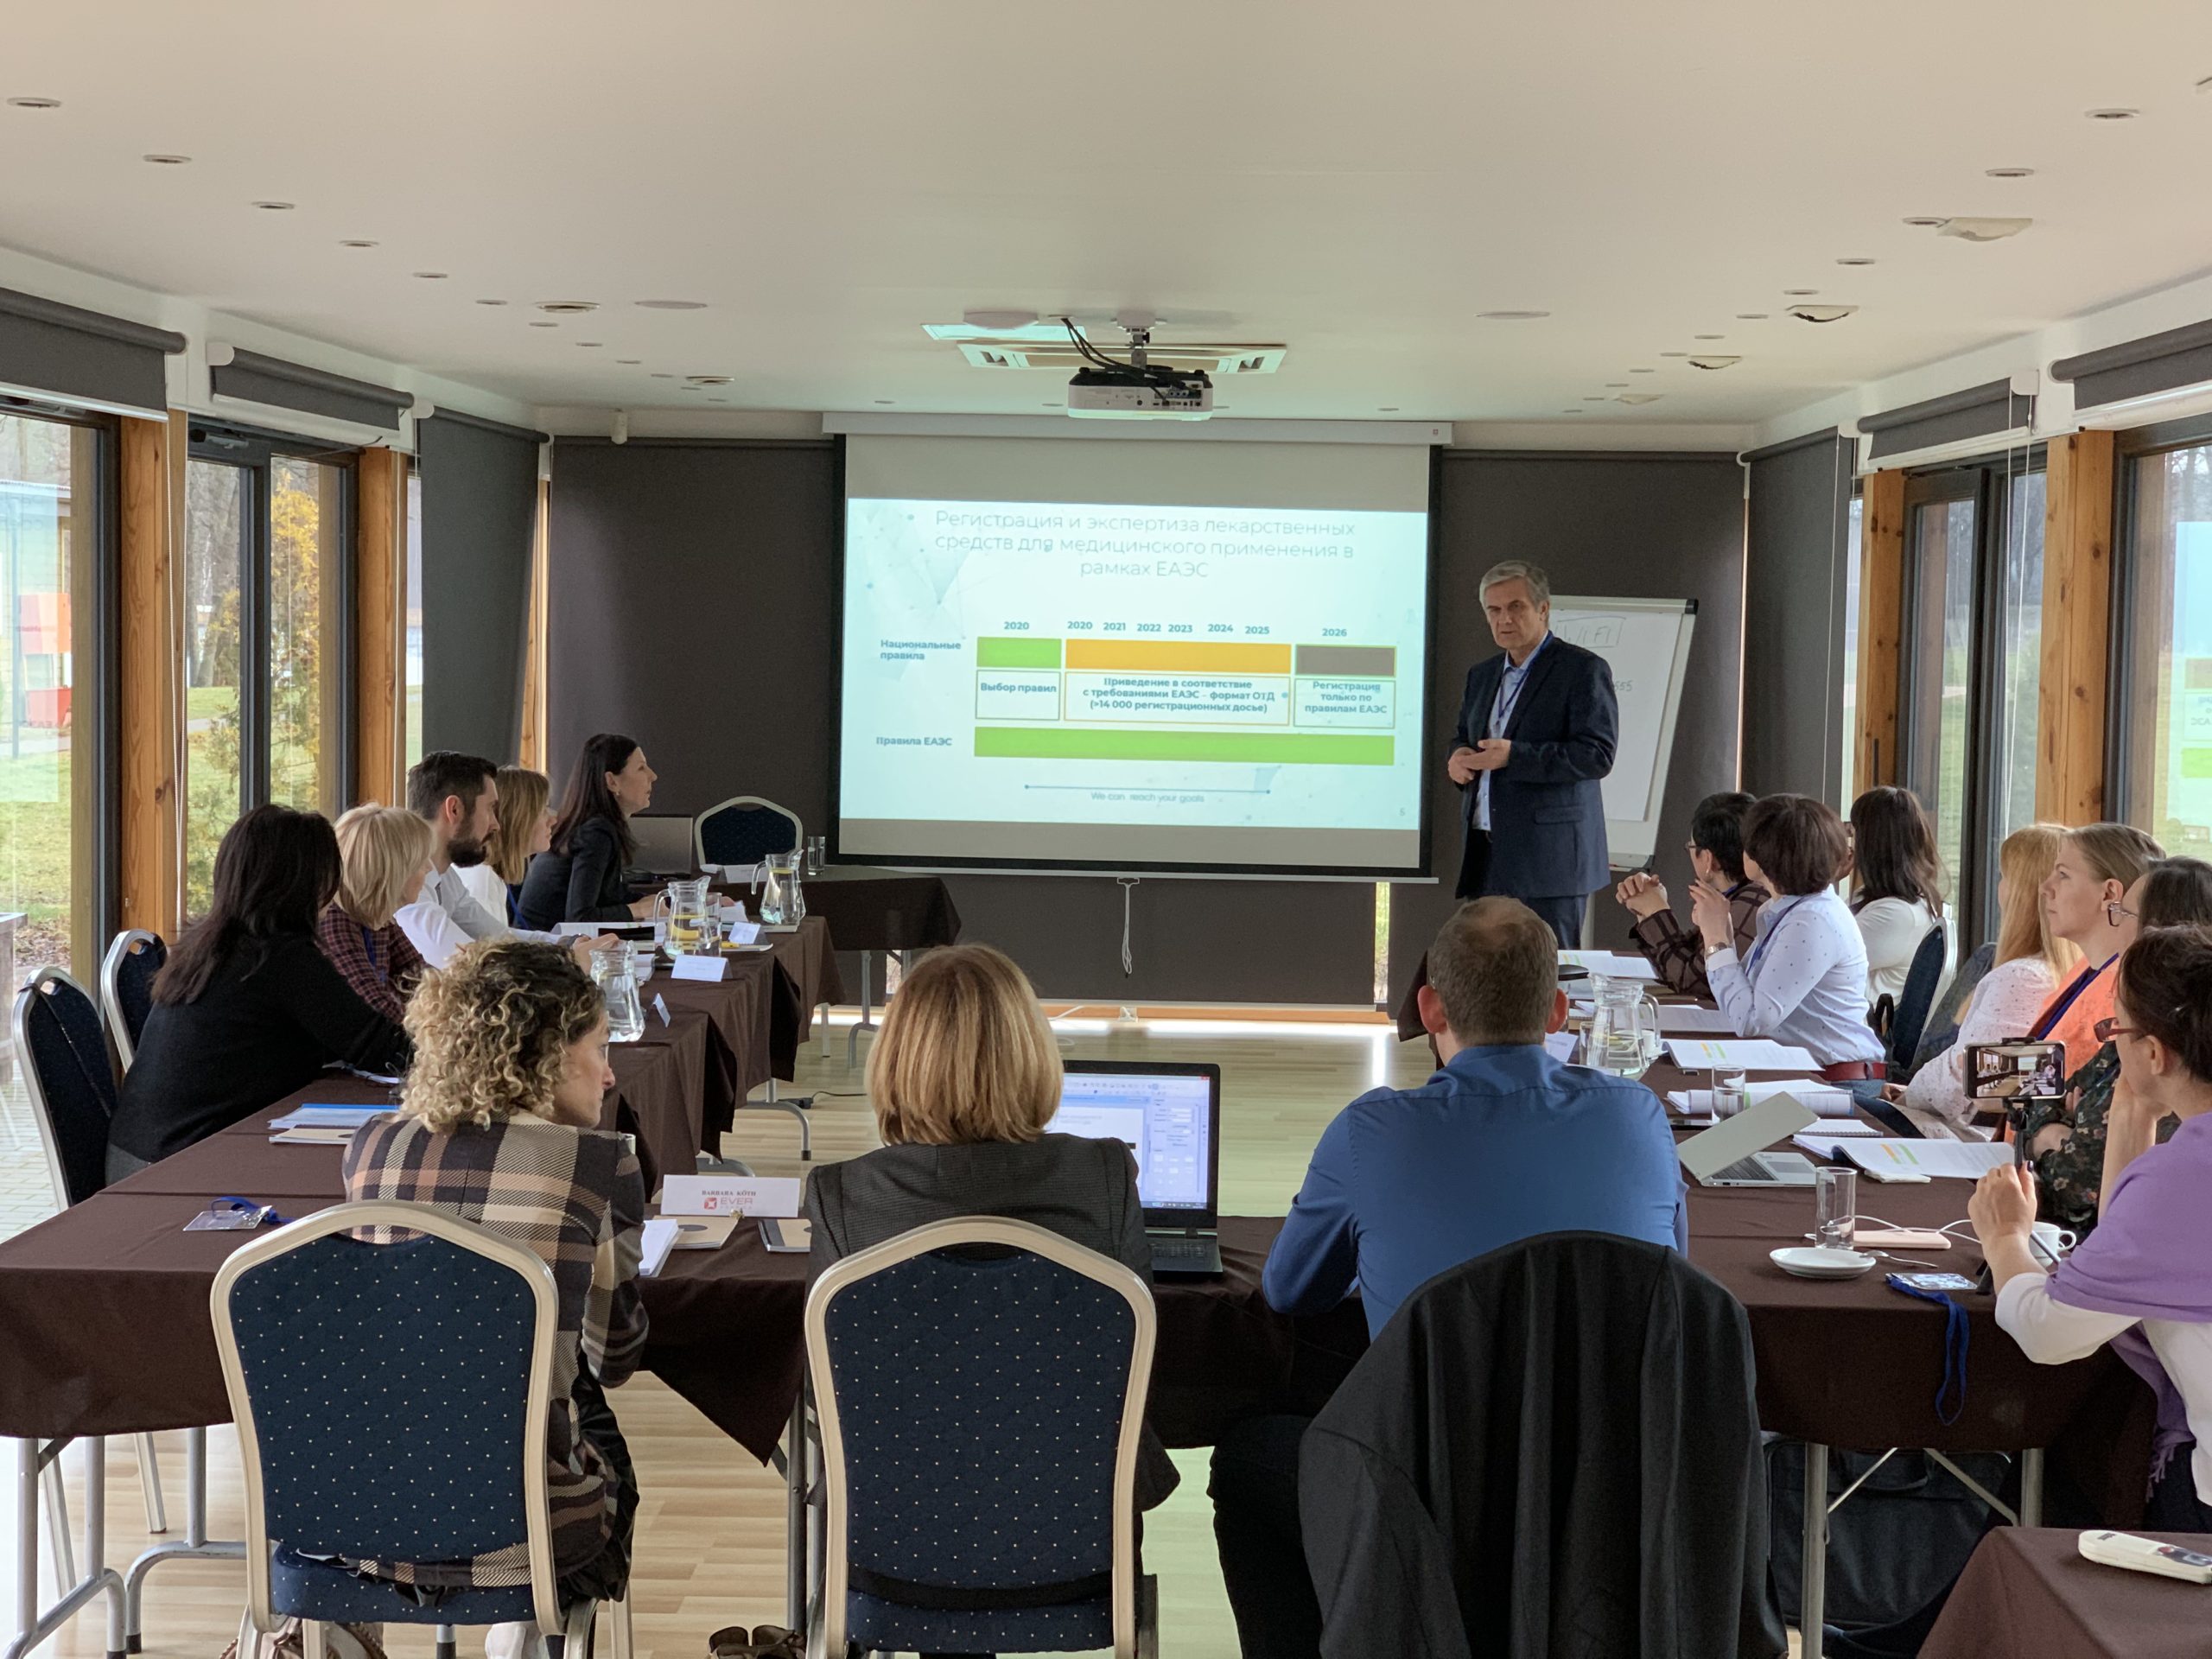 Training event “Management and operation of pharmacovigilance system in EAEU